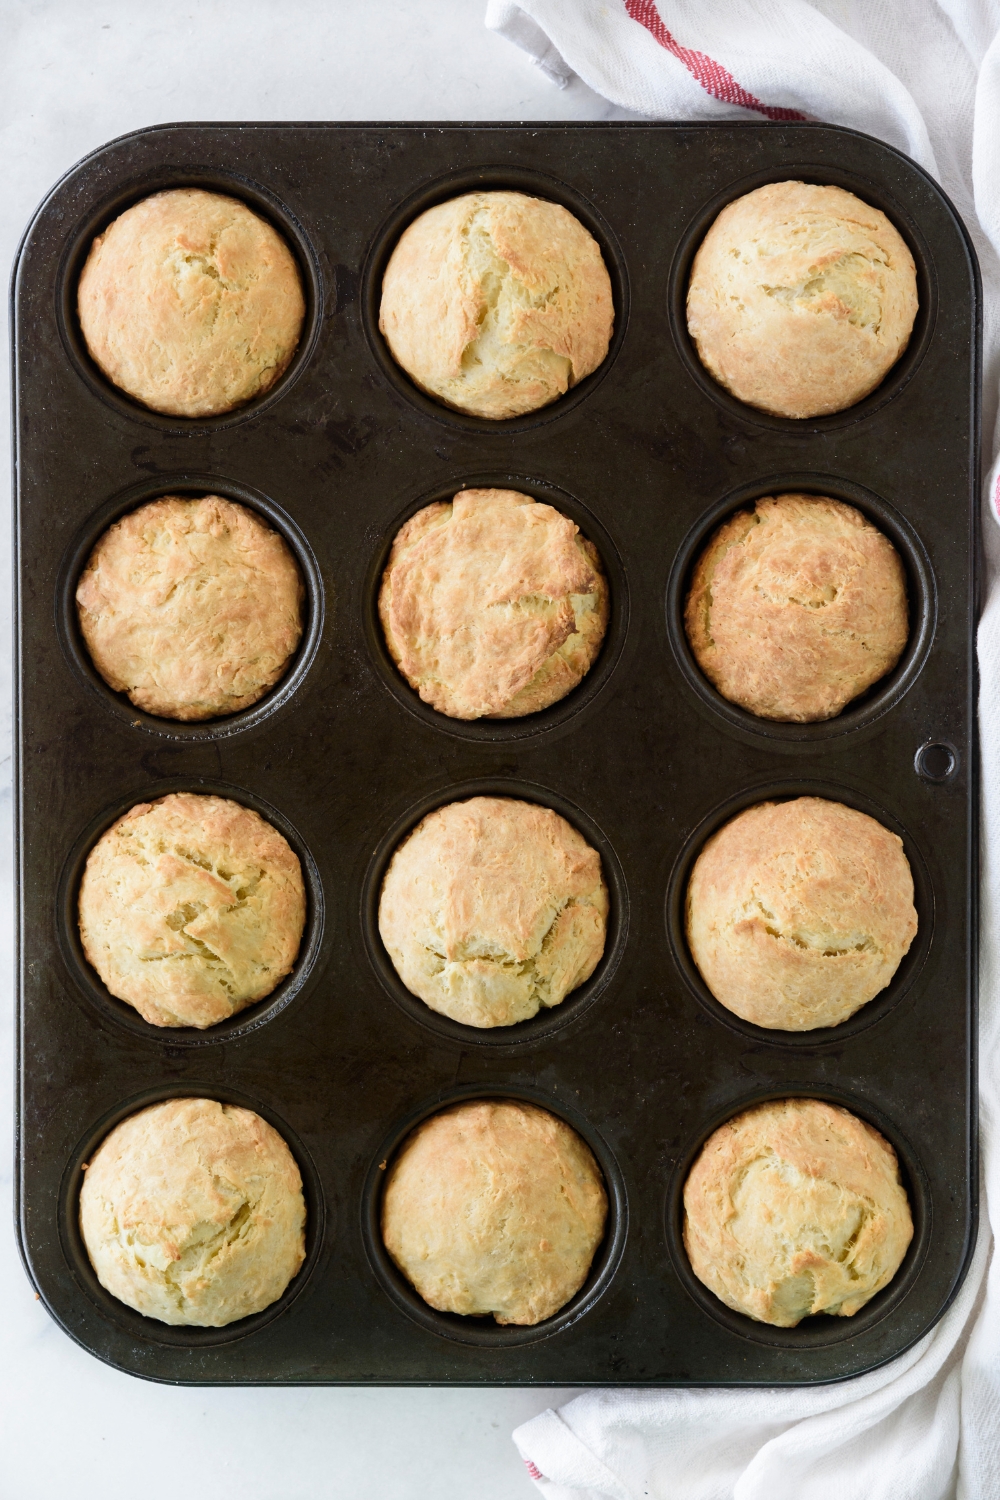 Baked biscuits in a black muffin pan